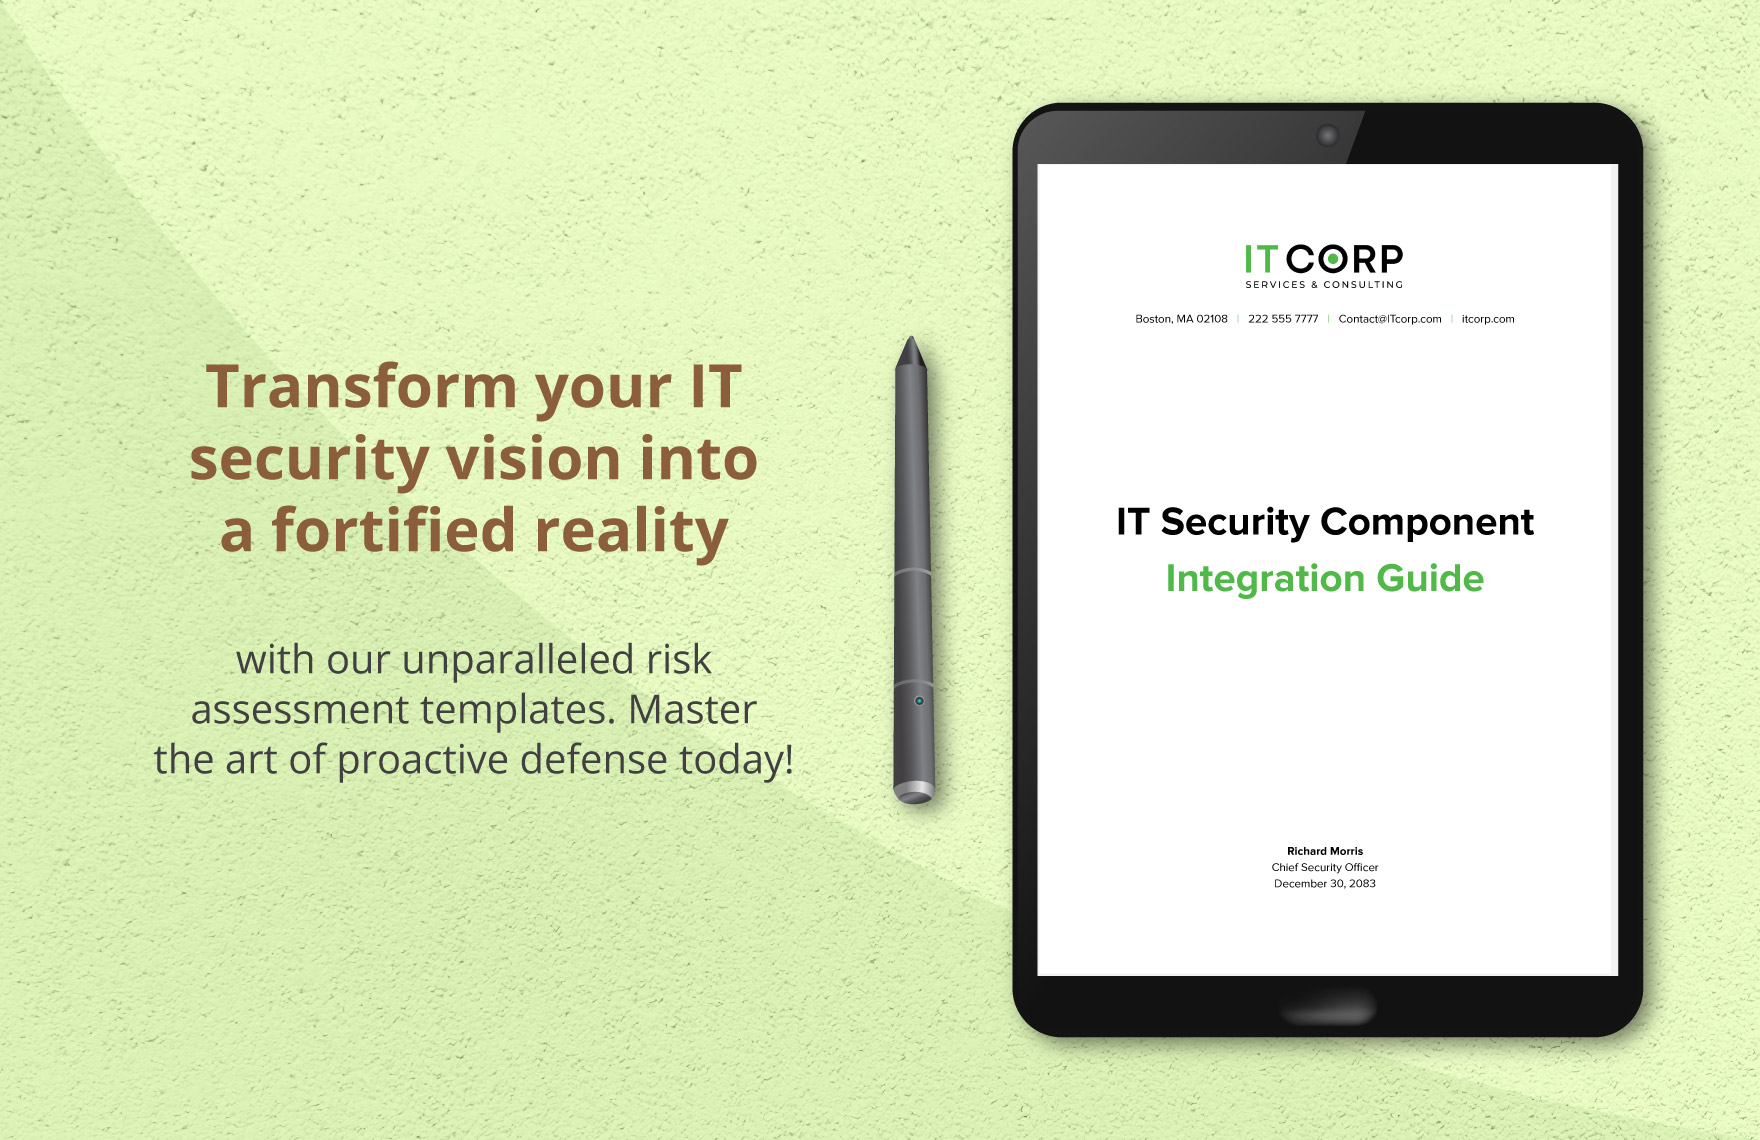 IT Security Component Integration Guide Template